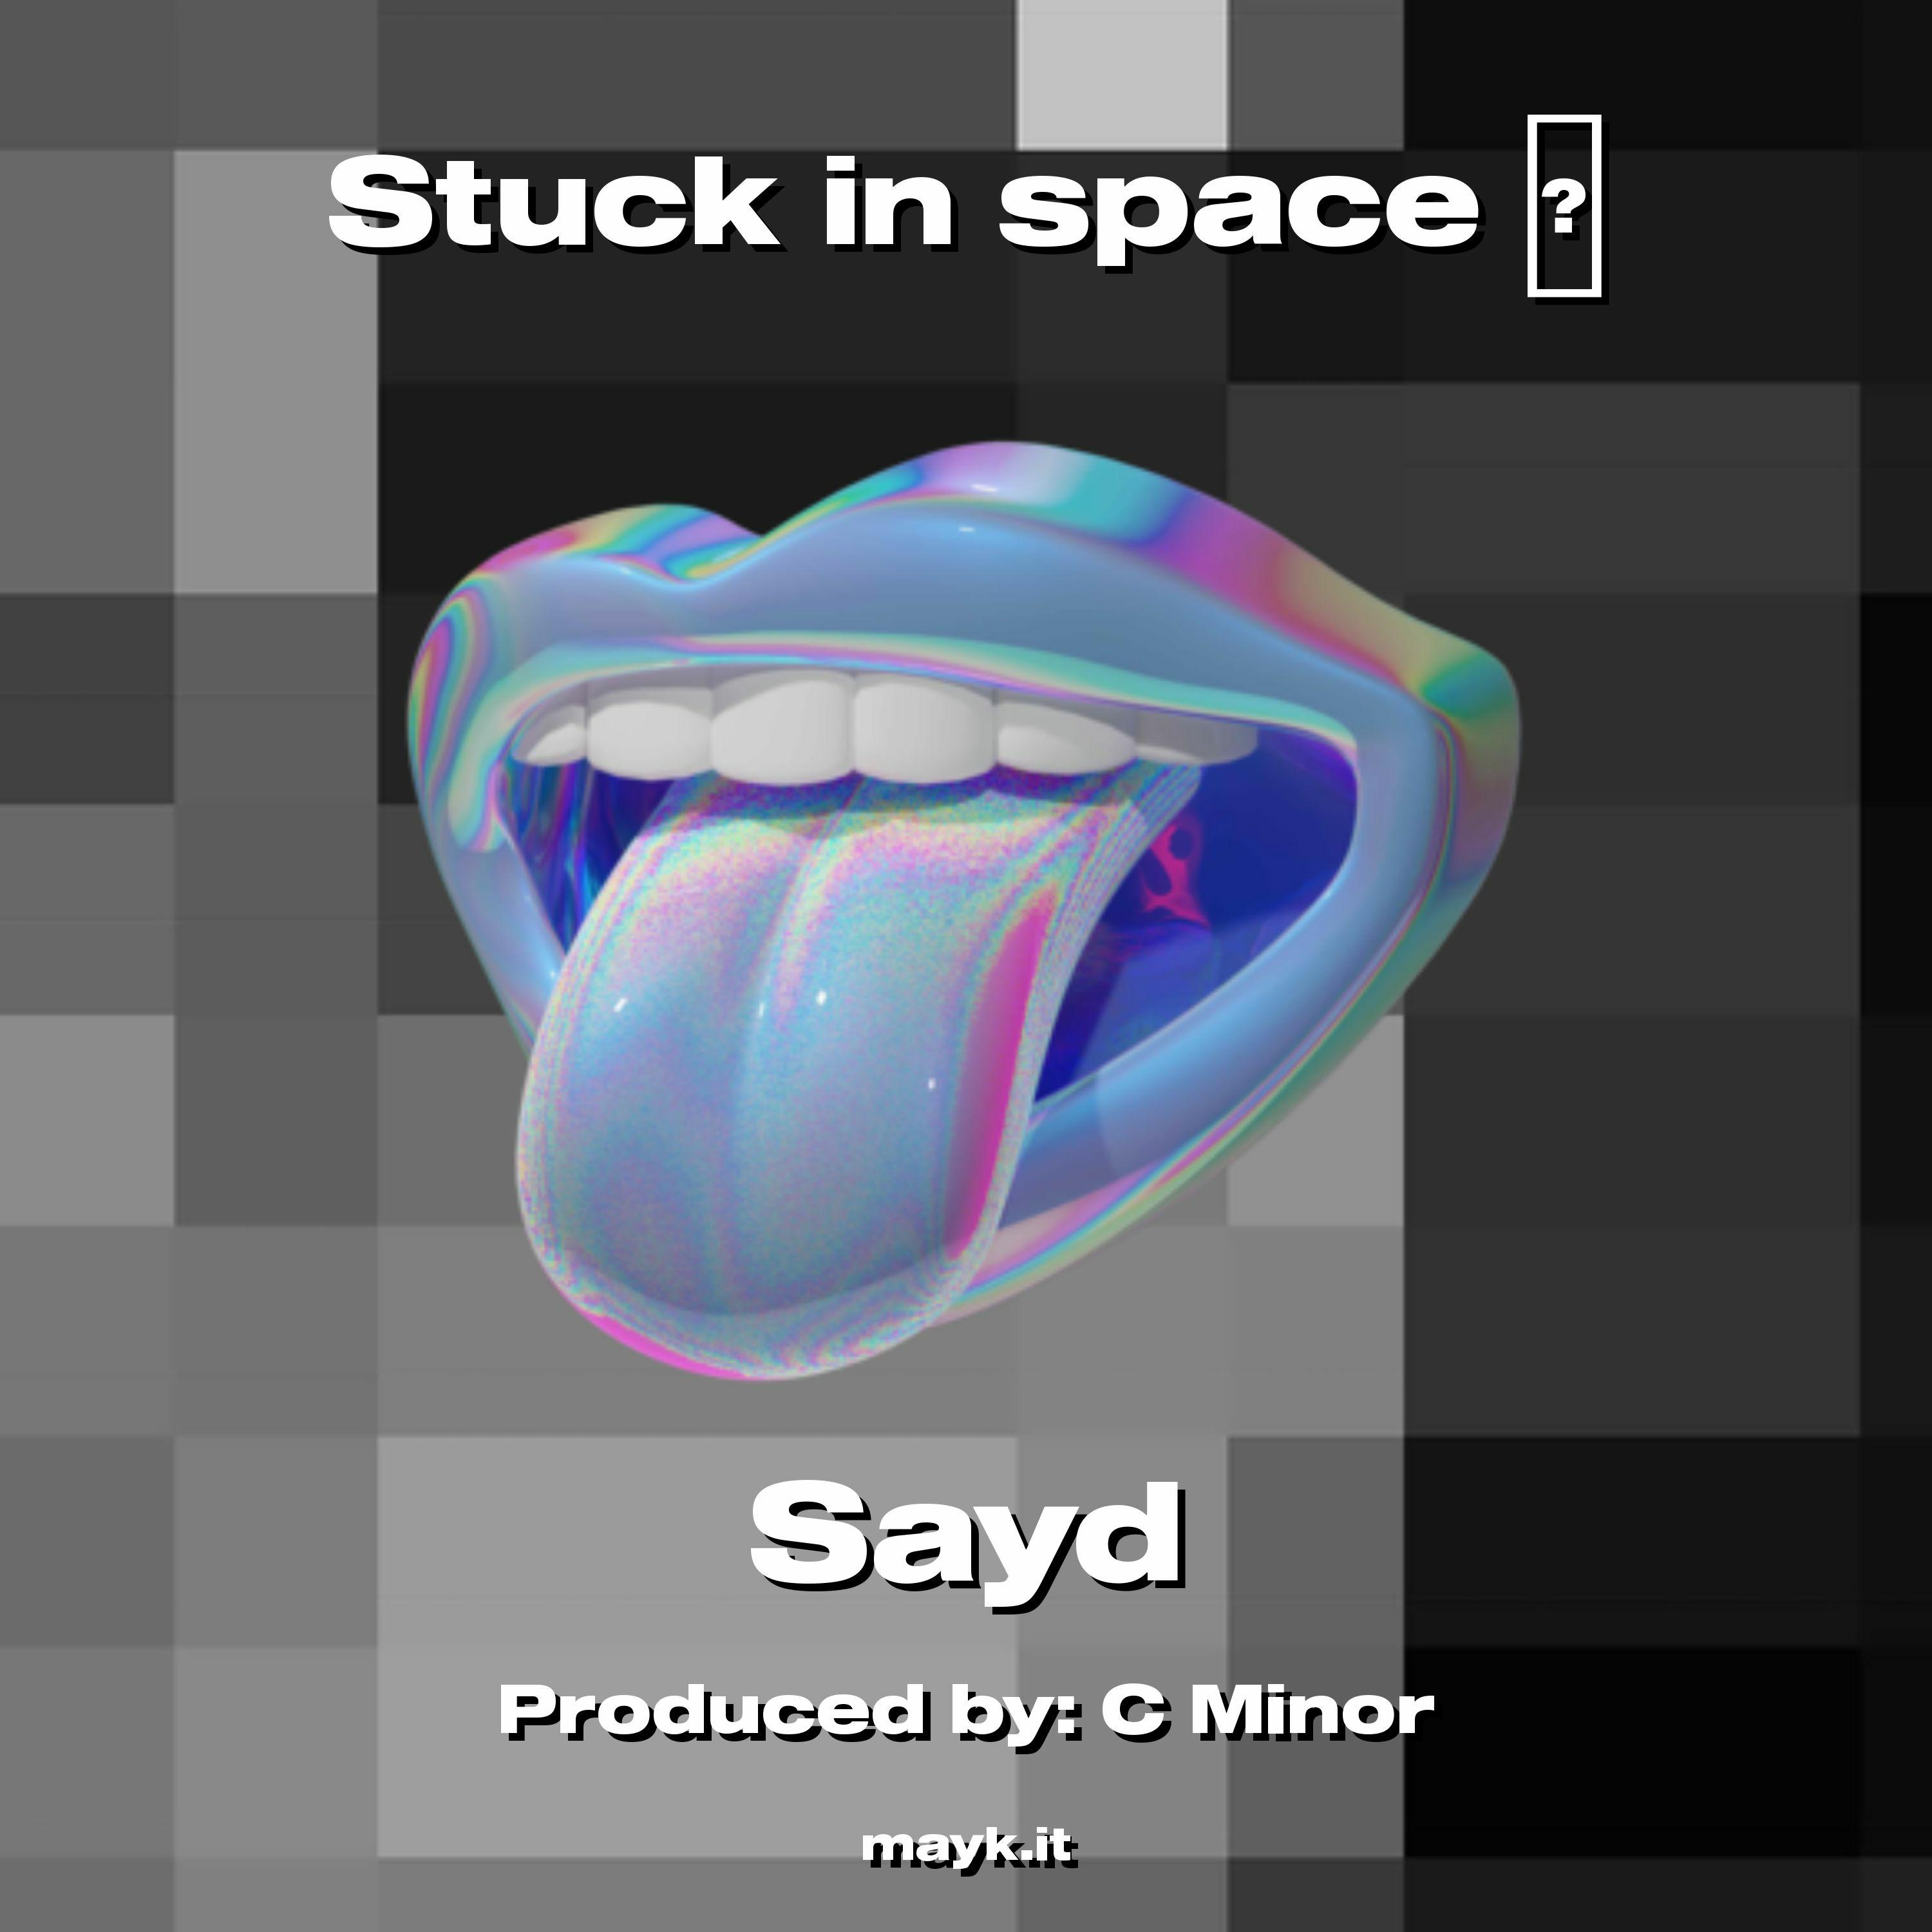 Sayd - Stuck in space